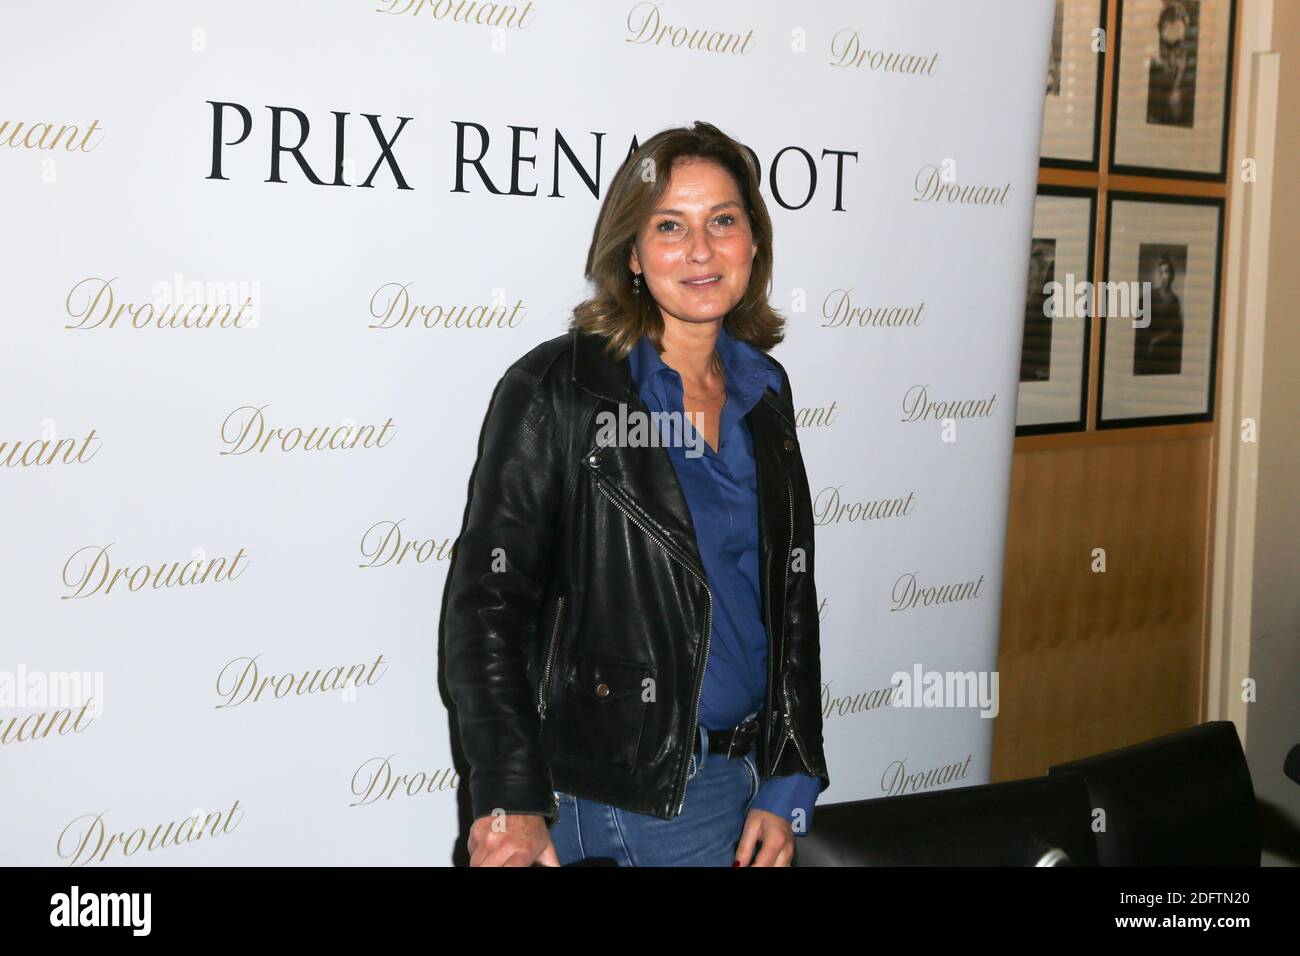 Valerie Manteau for her book " Le Sillon" winning the Prix Renaudot on  November 7, 2018 in Paris, France. Photo by Nasser Berzane/ABACAPRESS.COM  Stock Photo - Alamy